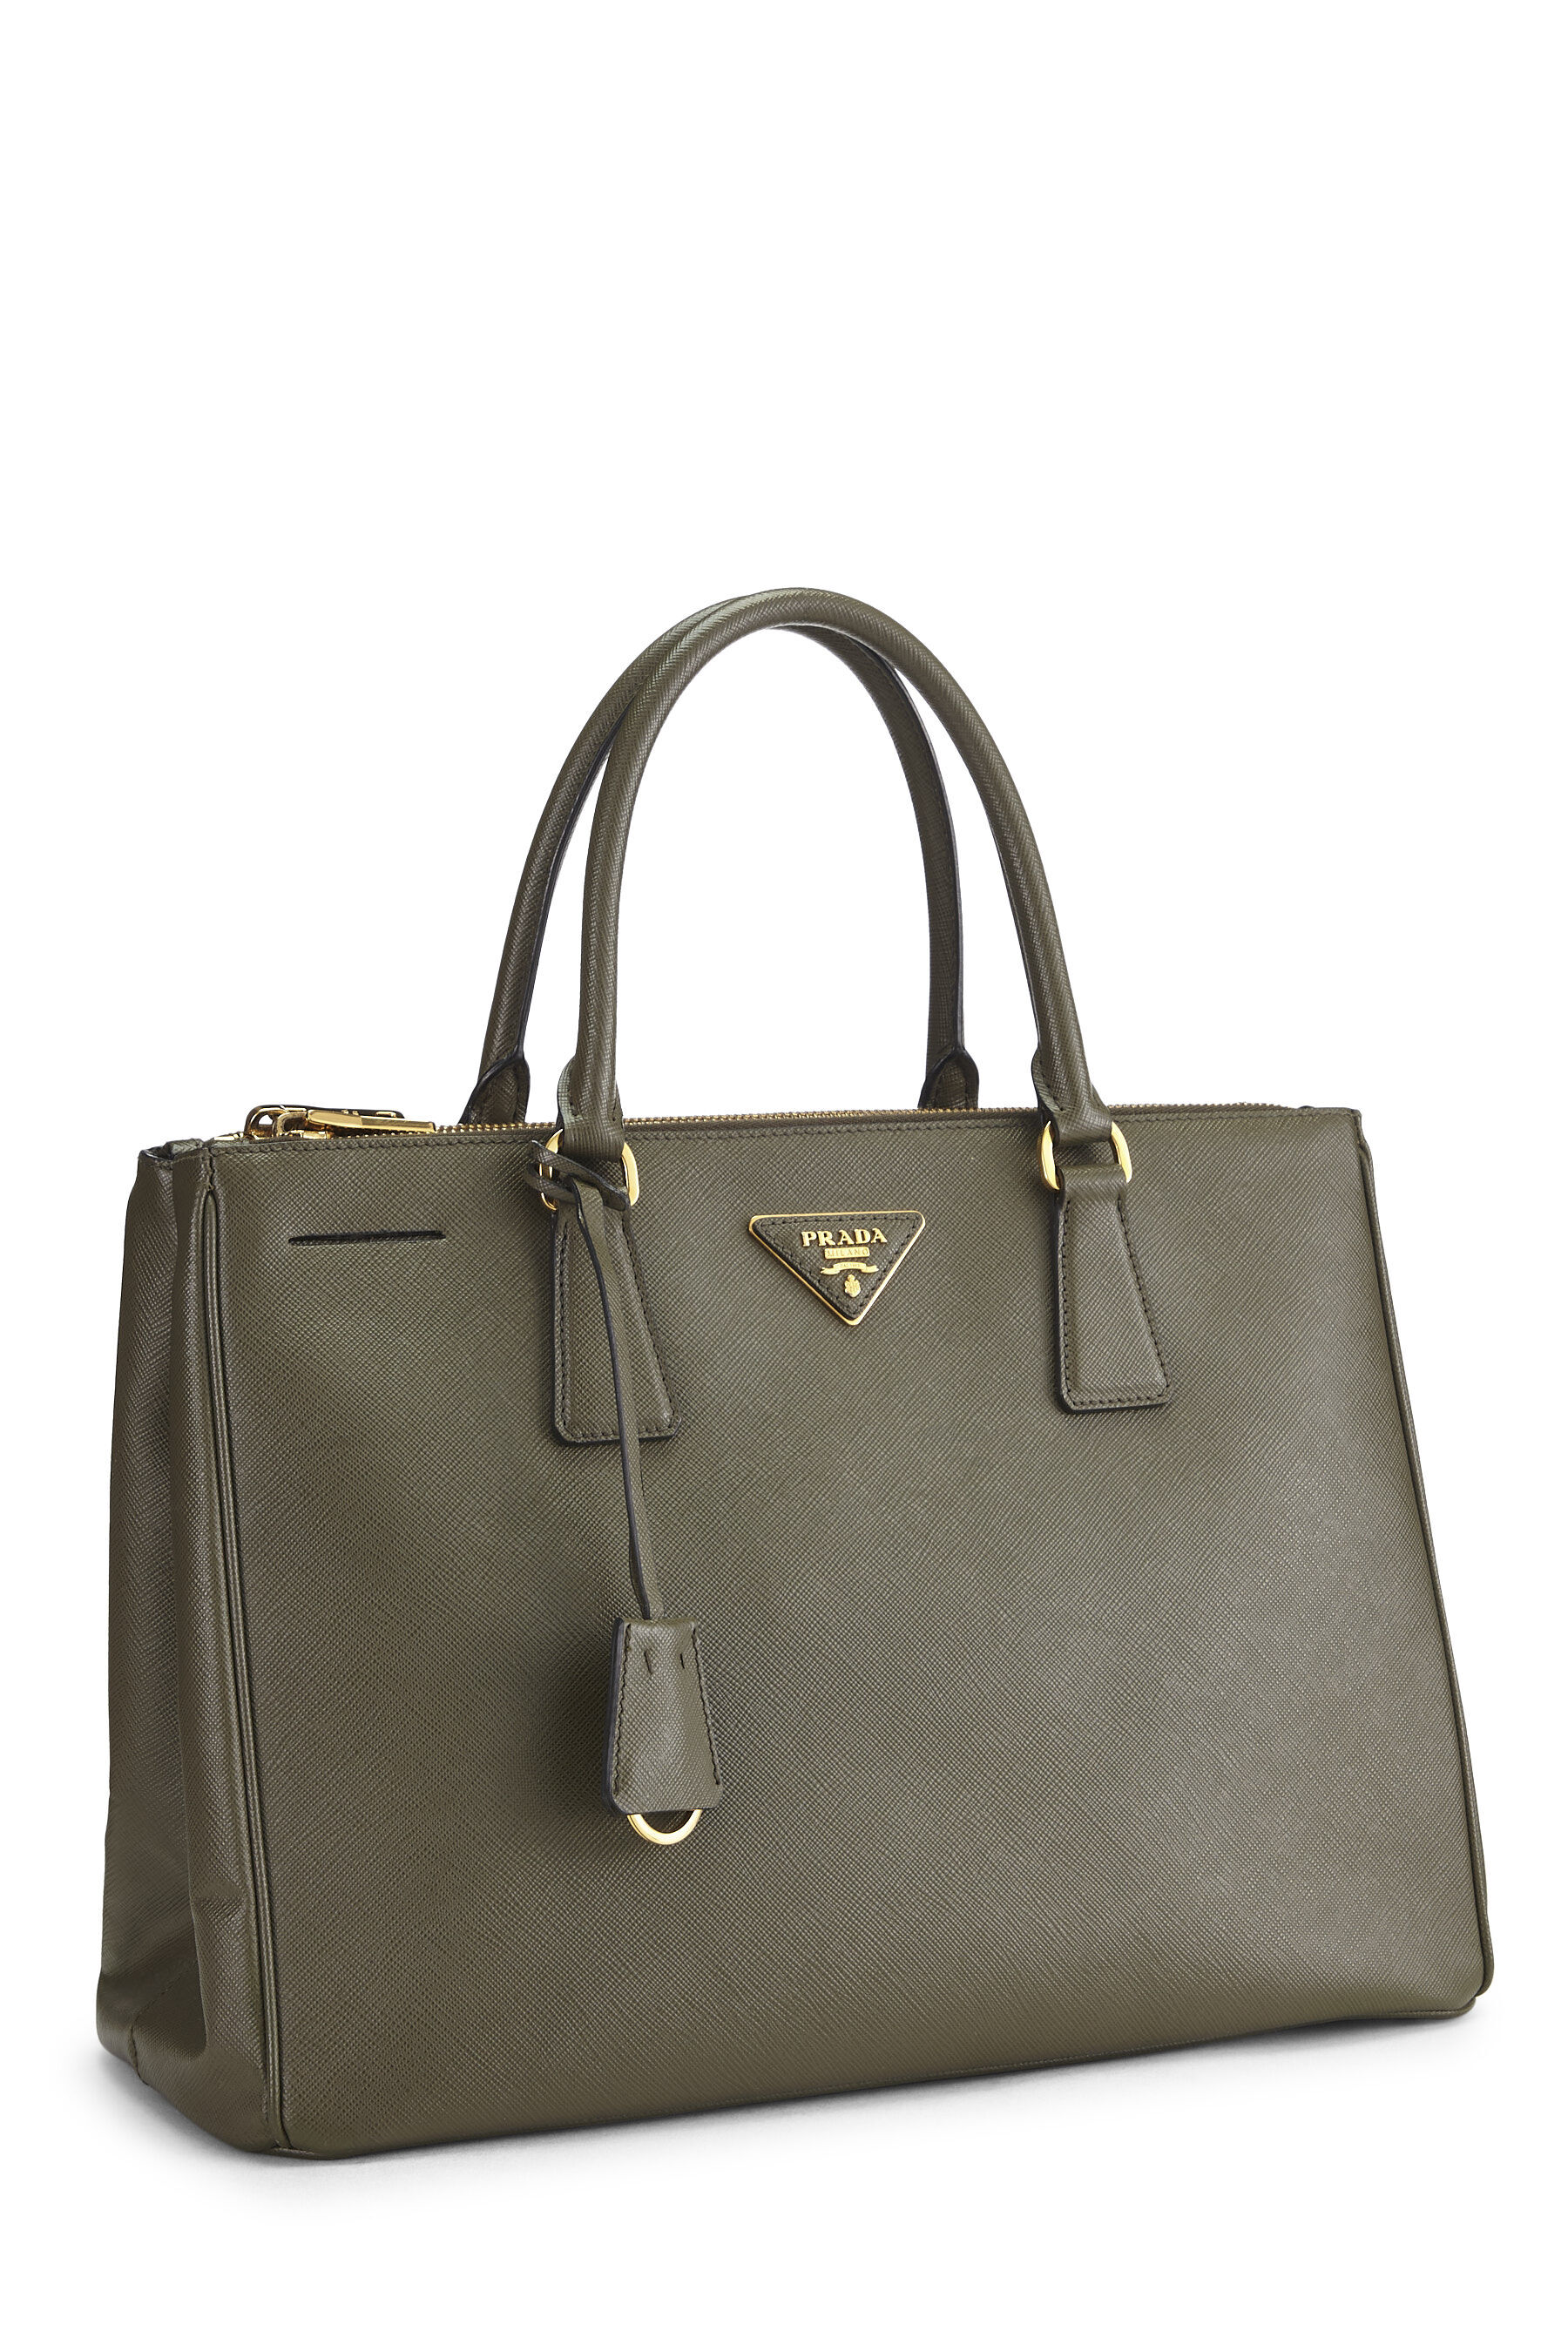 Buy smart ladies bag in olive green with amazing stich design in Bangalore,  Free Shipping - redblooms